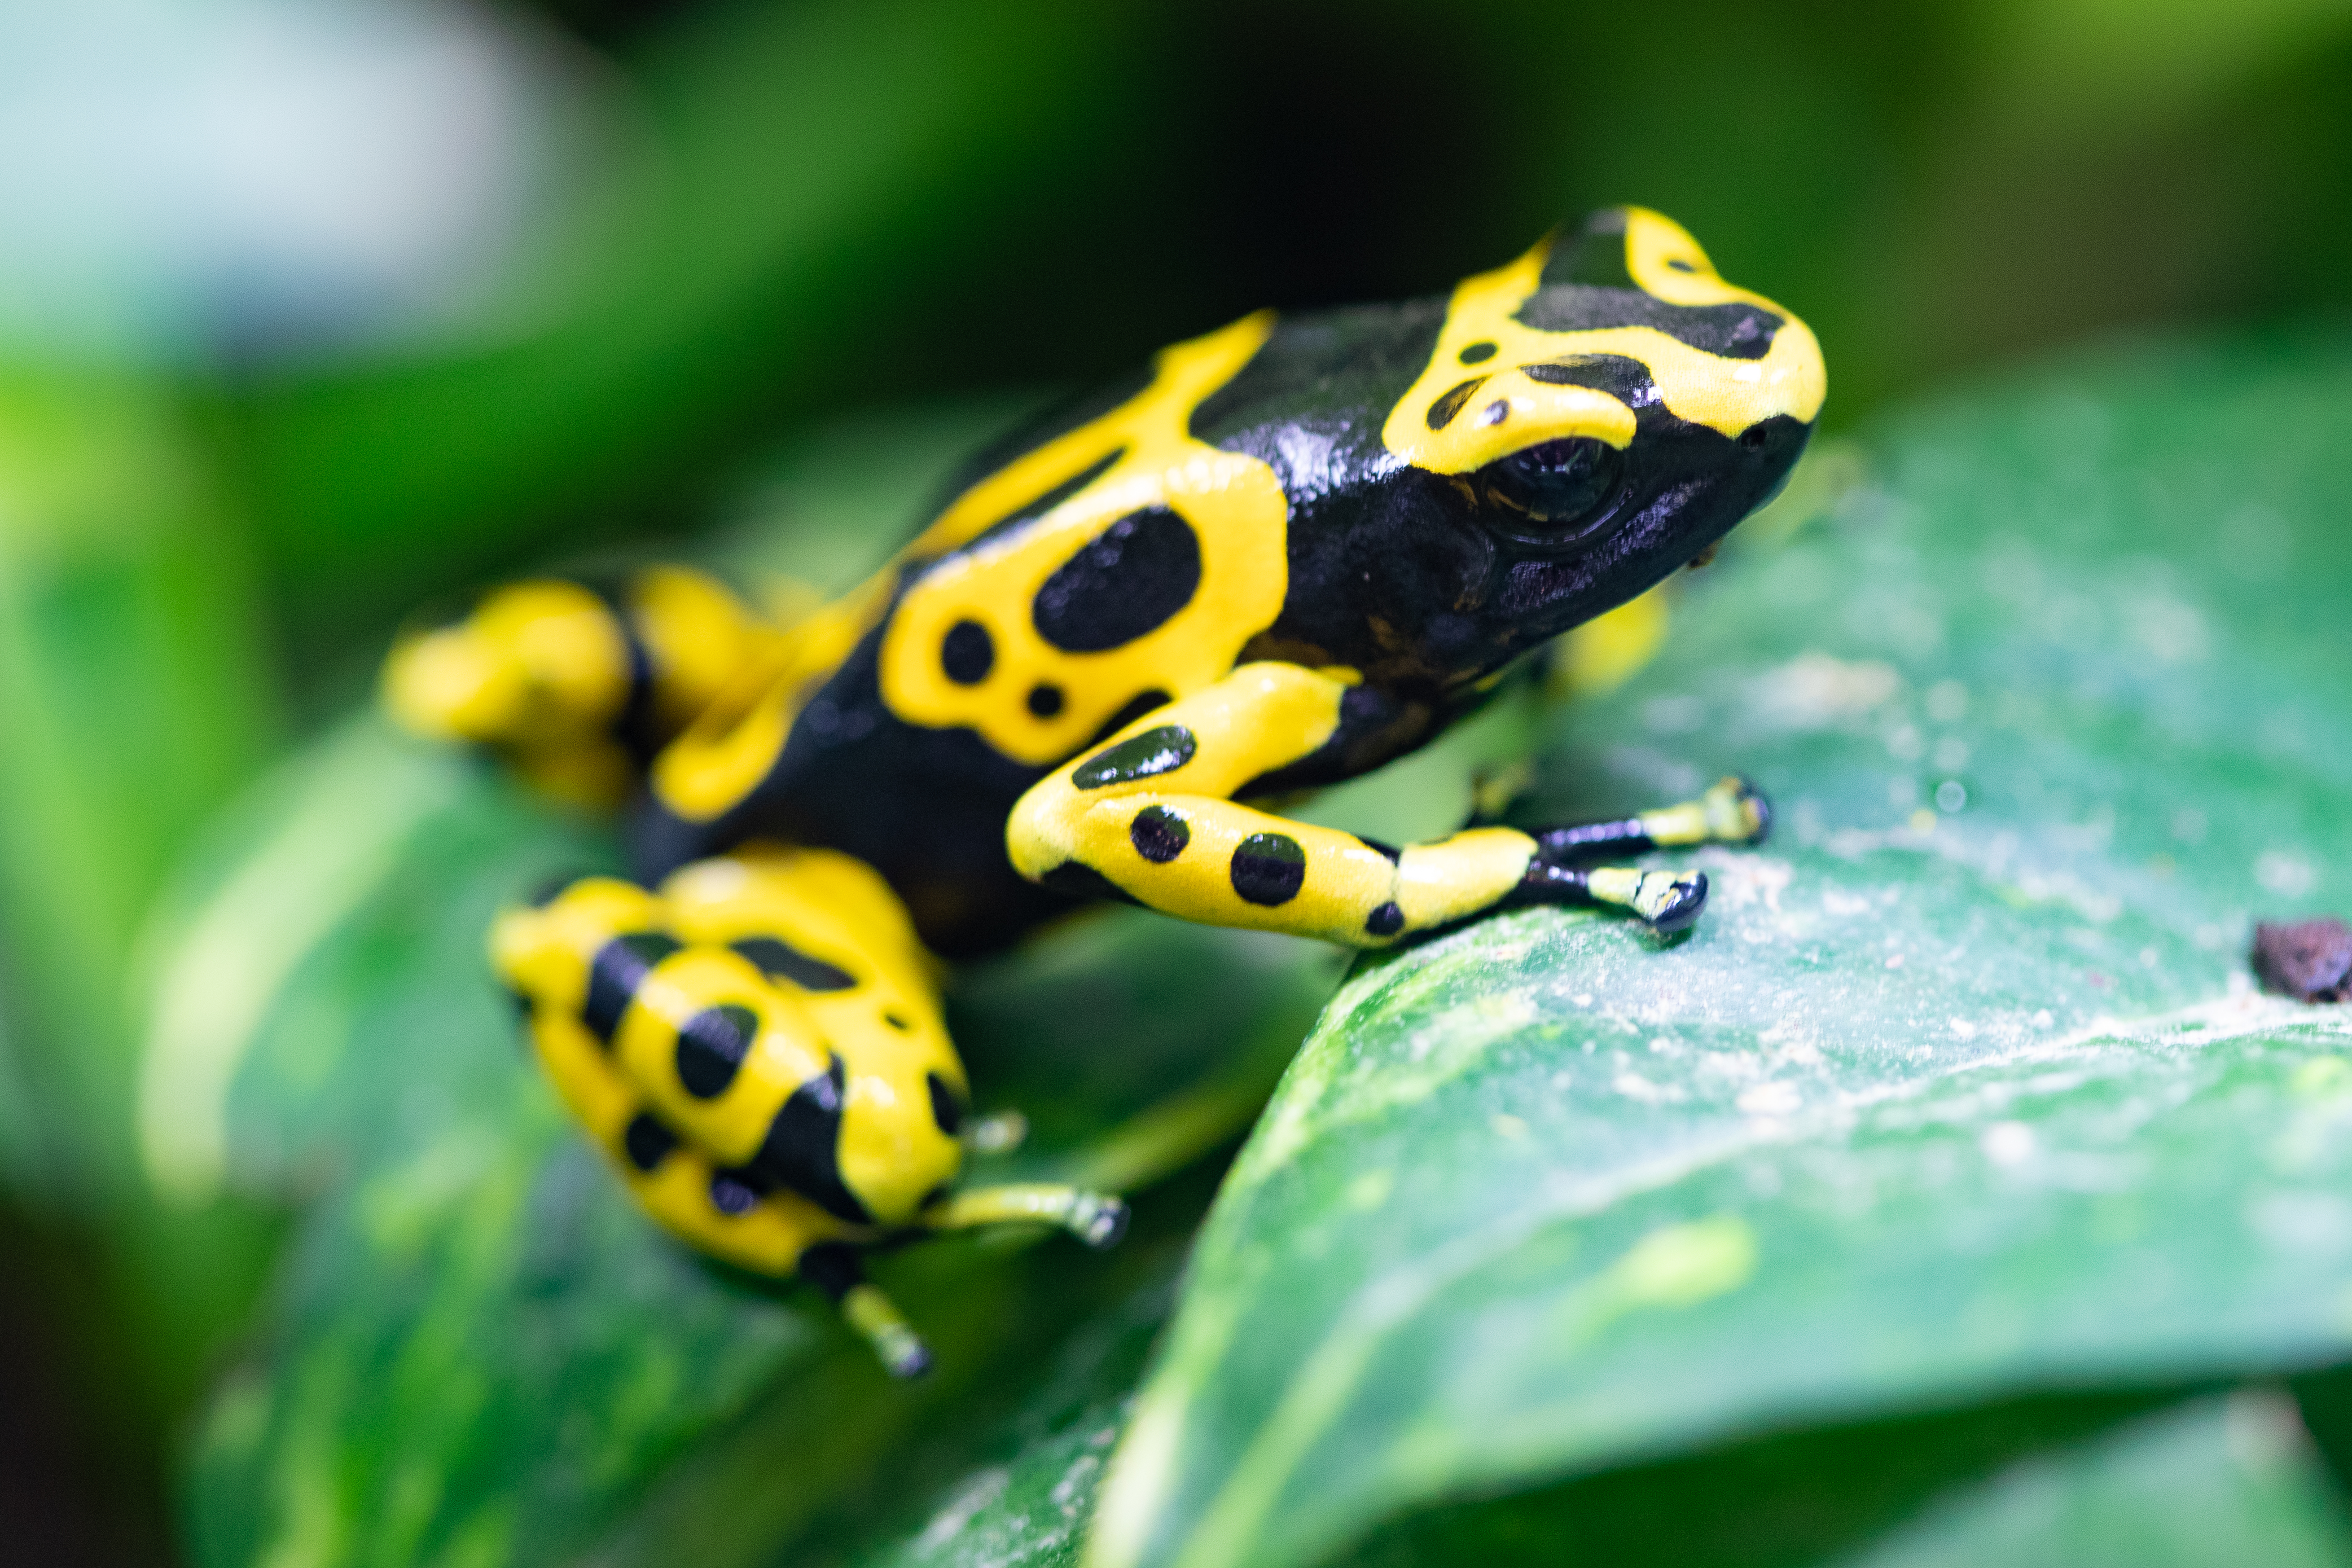 Poison dart frogs are cool, colorful and have a warning for potential predators: stay